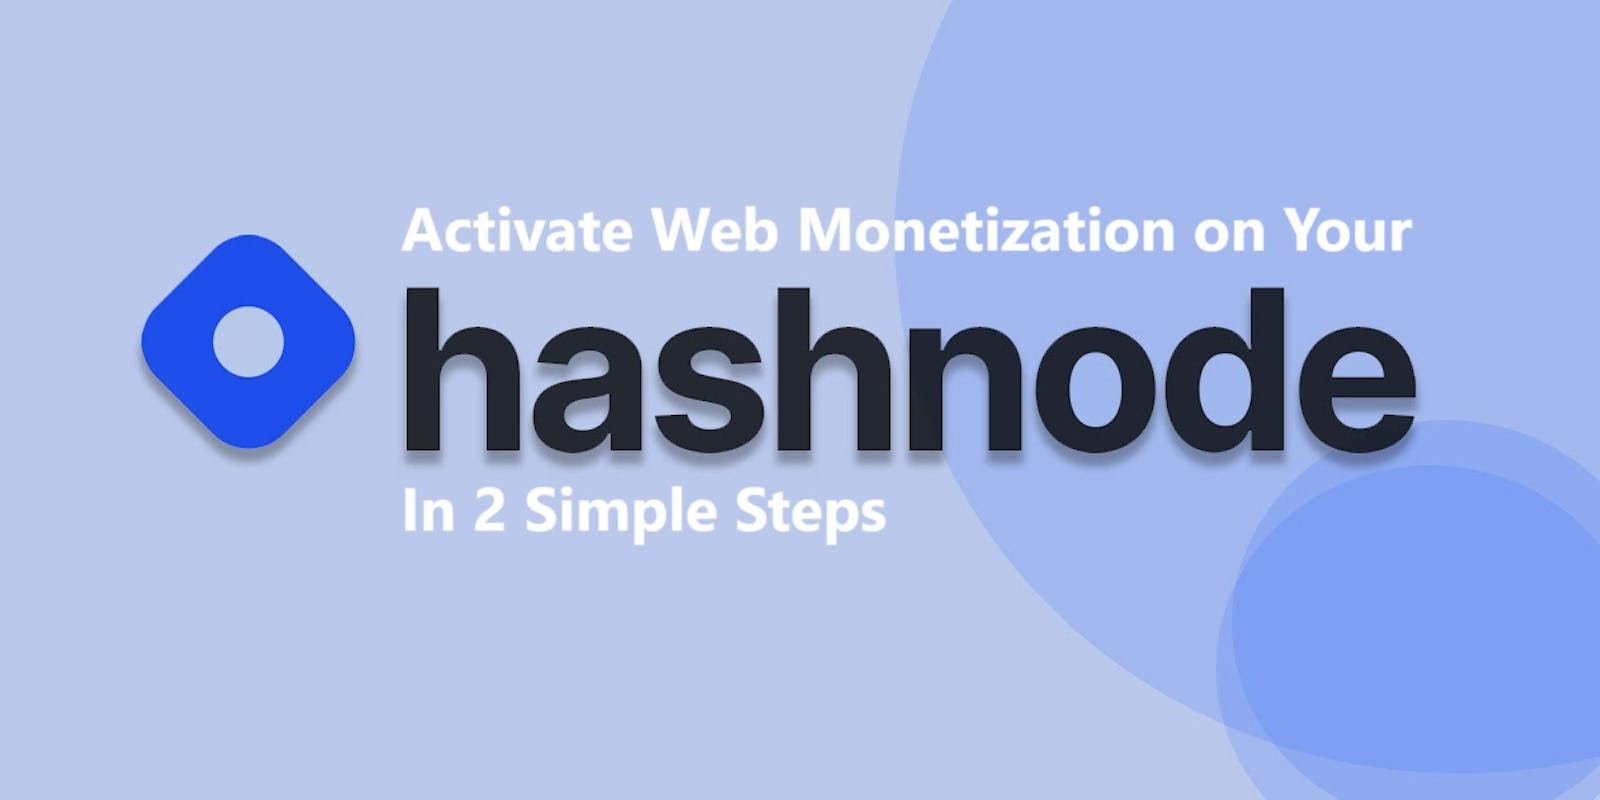 Activate Web Monetization on Your Hashnode Blog in Just 2 Simple Steps